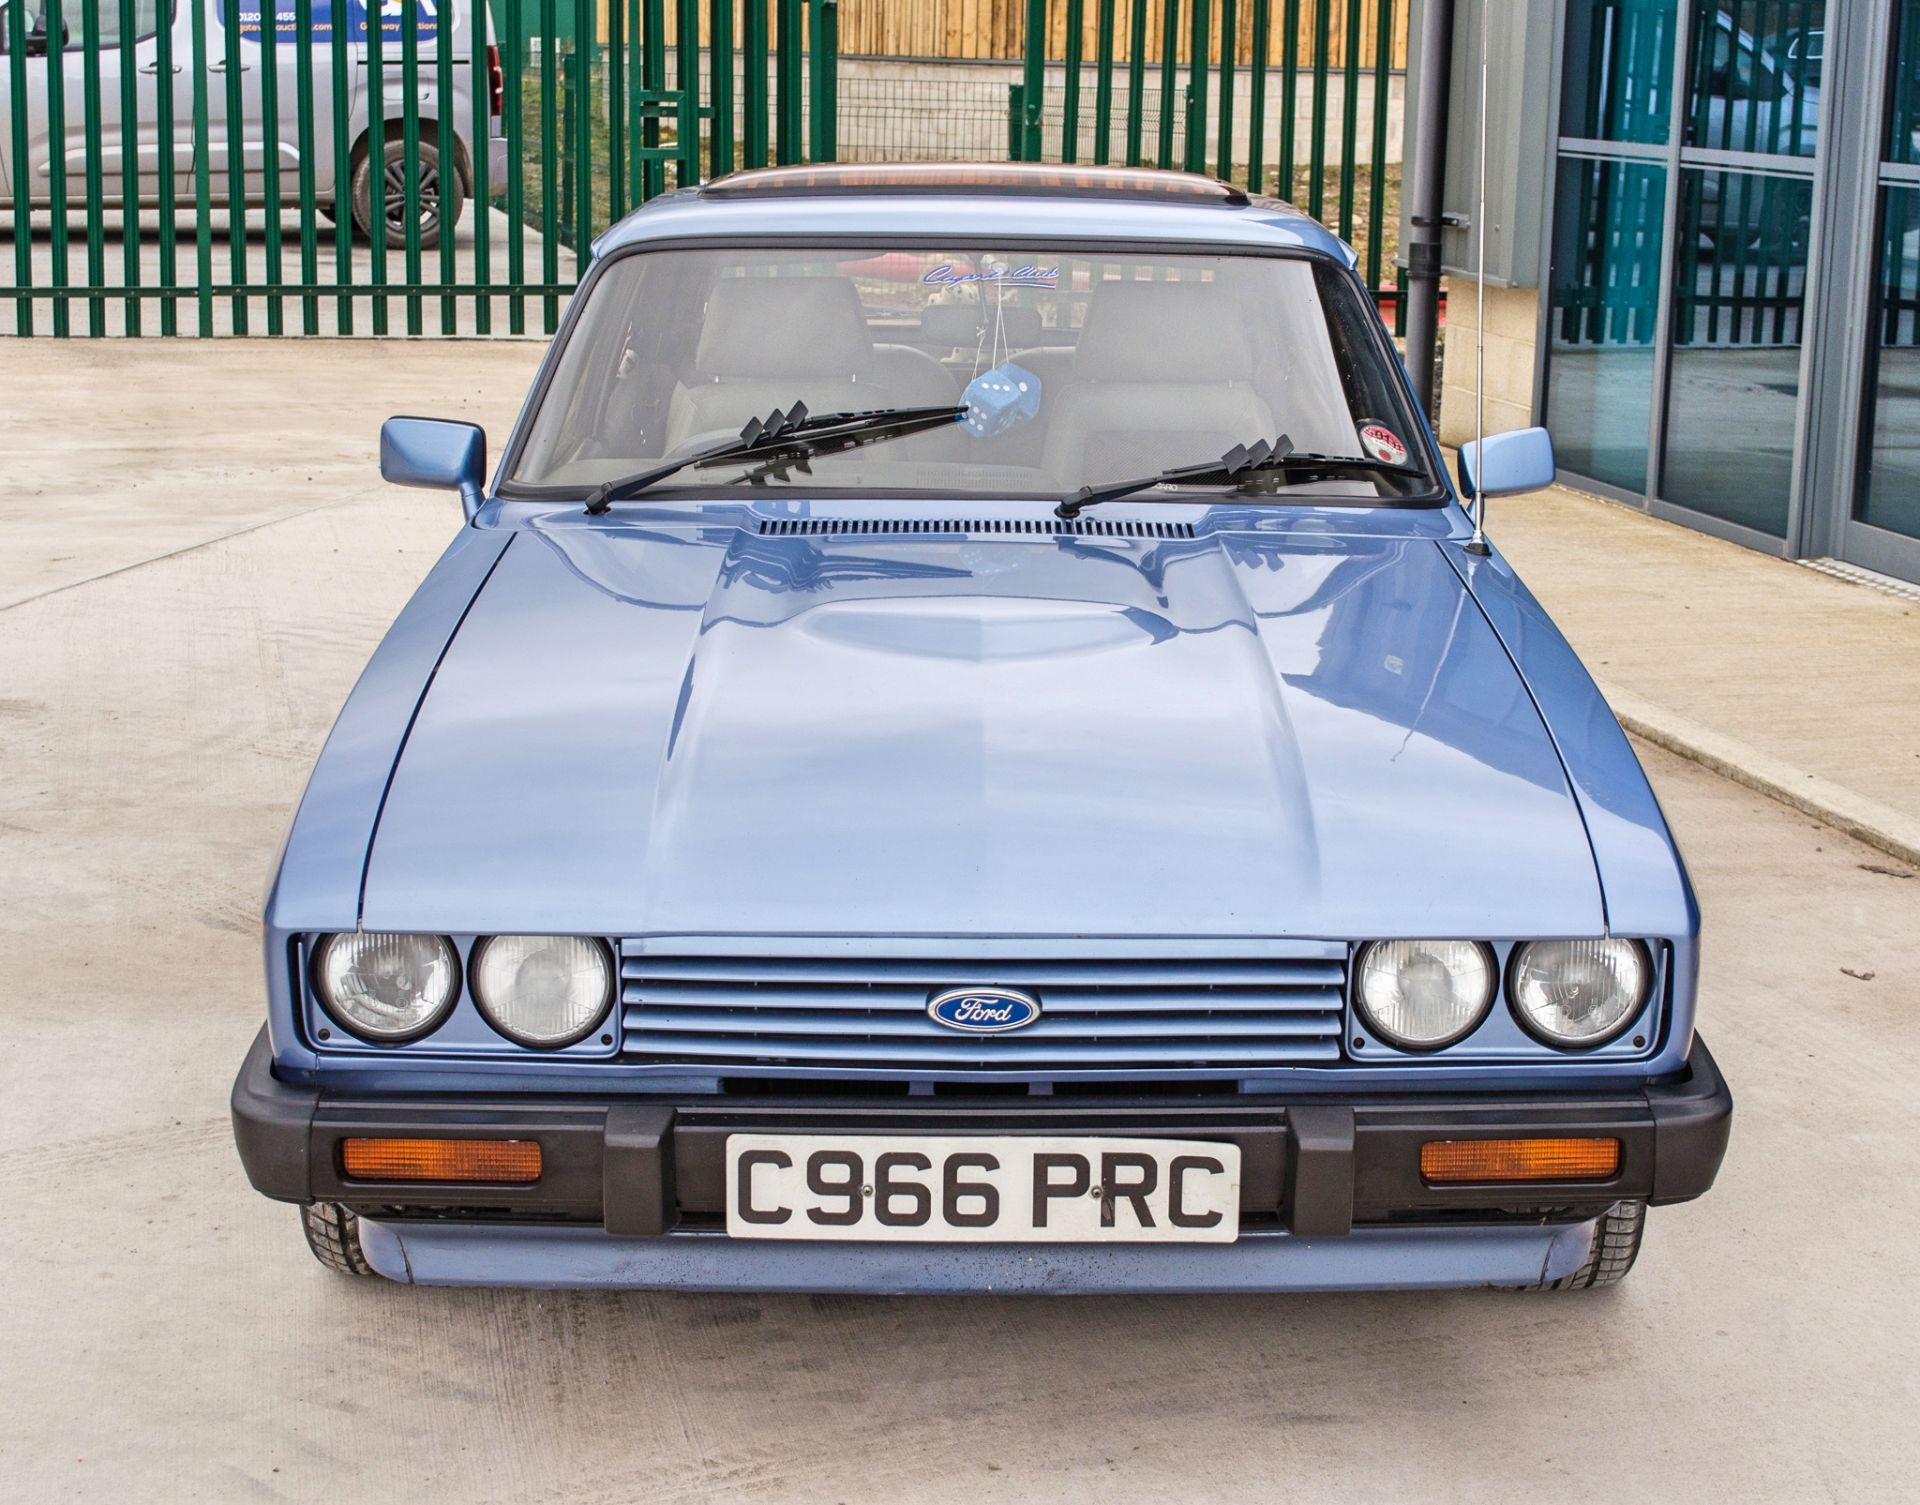 1986 Ford Capri 2.8 Injection Special 3 door coupe - Image 10 of 56